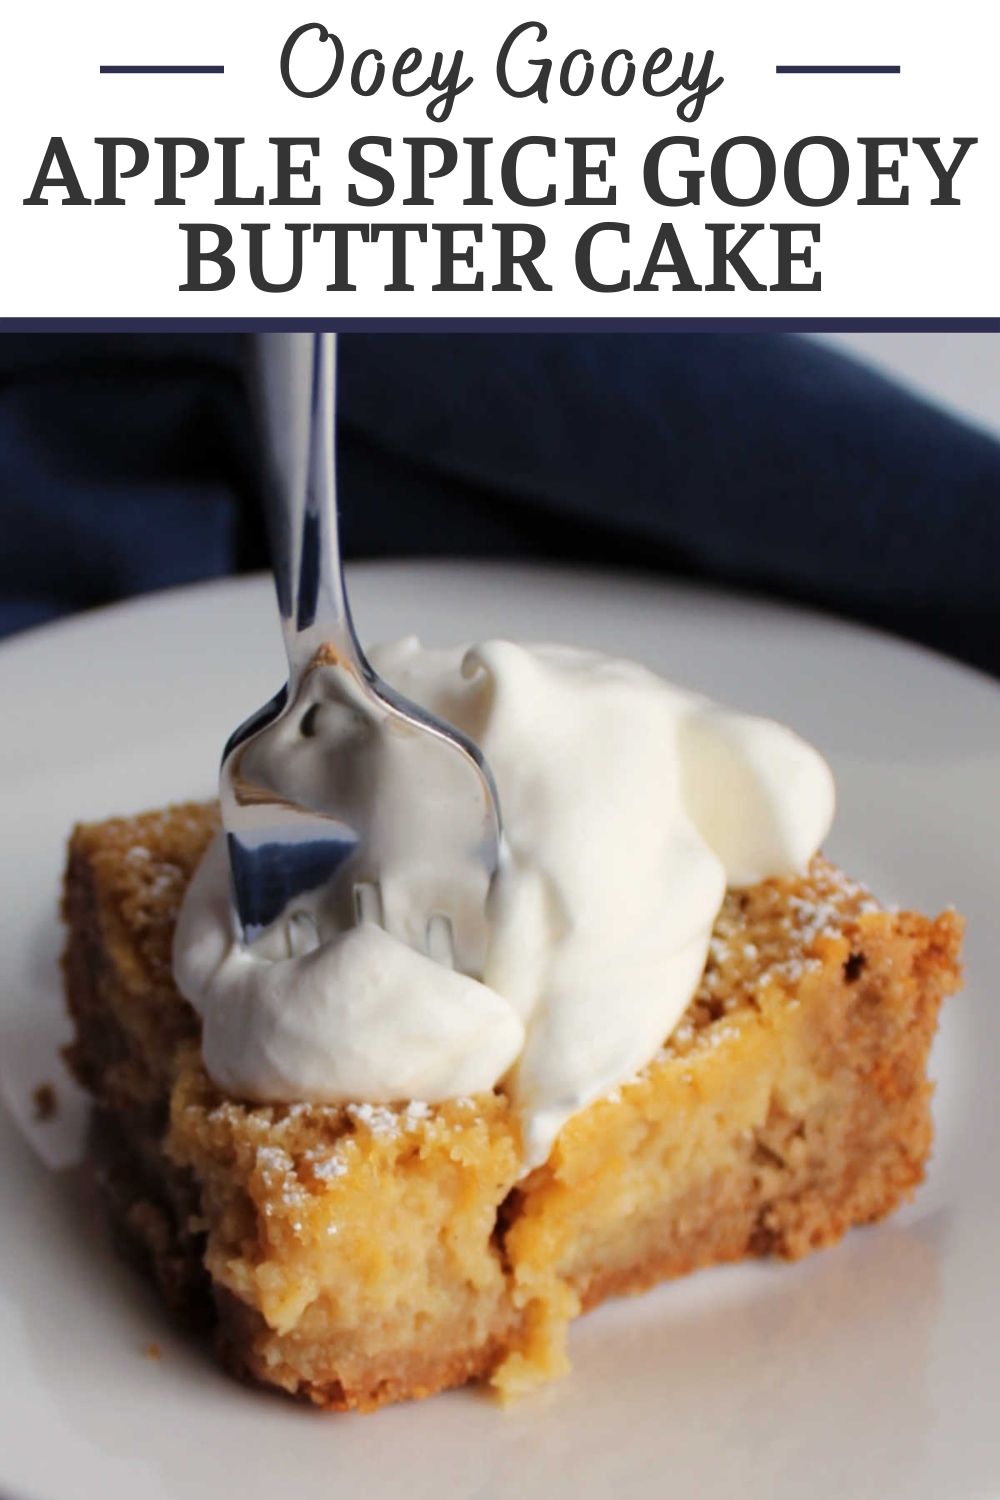 Apple spice gooey butter cake has all of the ooey gooey butter cake texture with spice cake and apple butter mixed in. It is a perfect fall treat that is easy to make and tastes unbelievable.